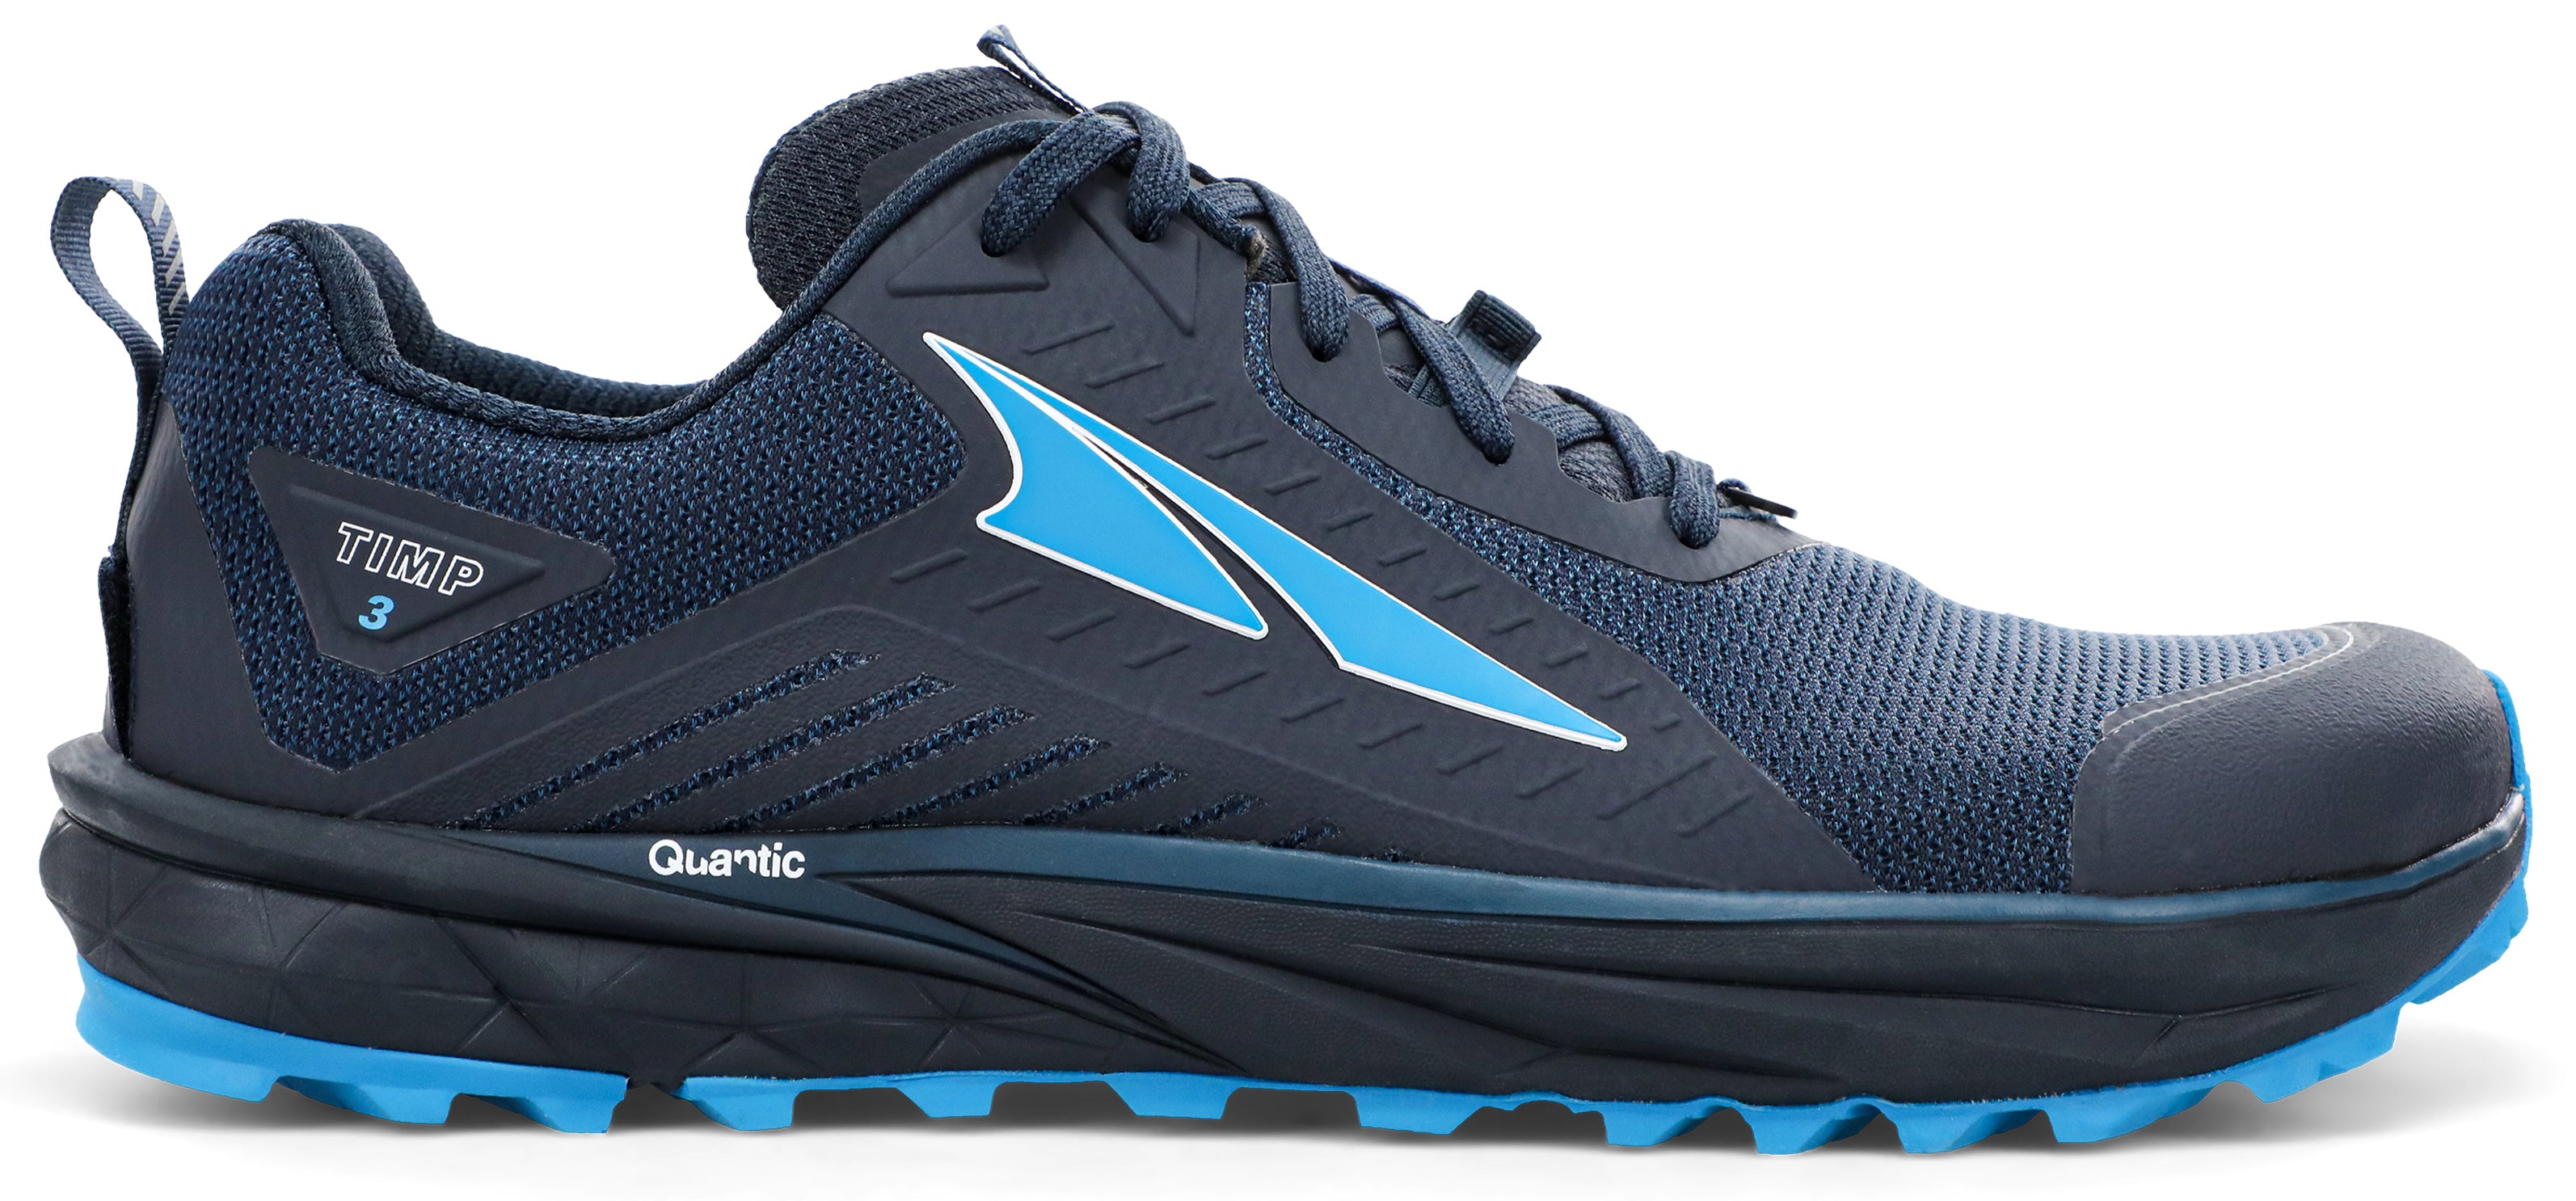 Men's Altra Timp 3 Trail Running Shoe in Dark Blue from the side